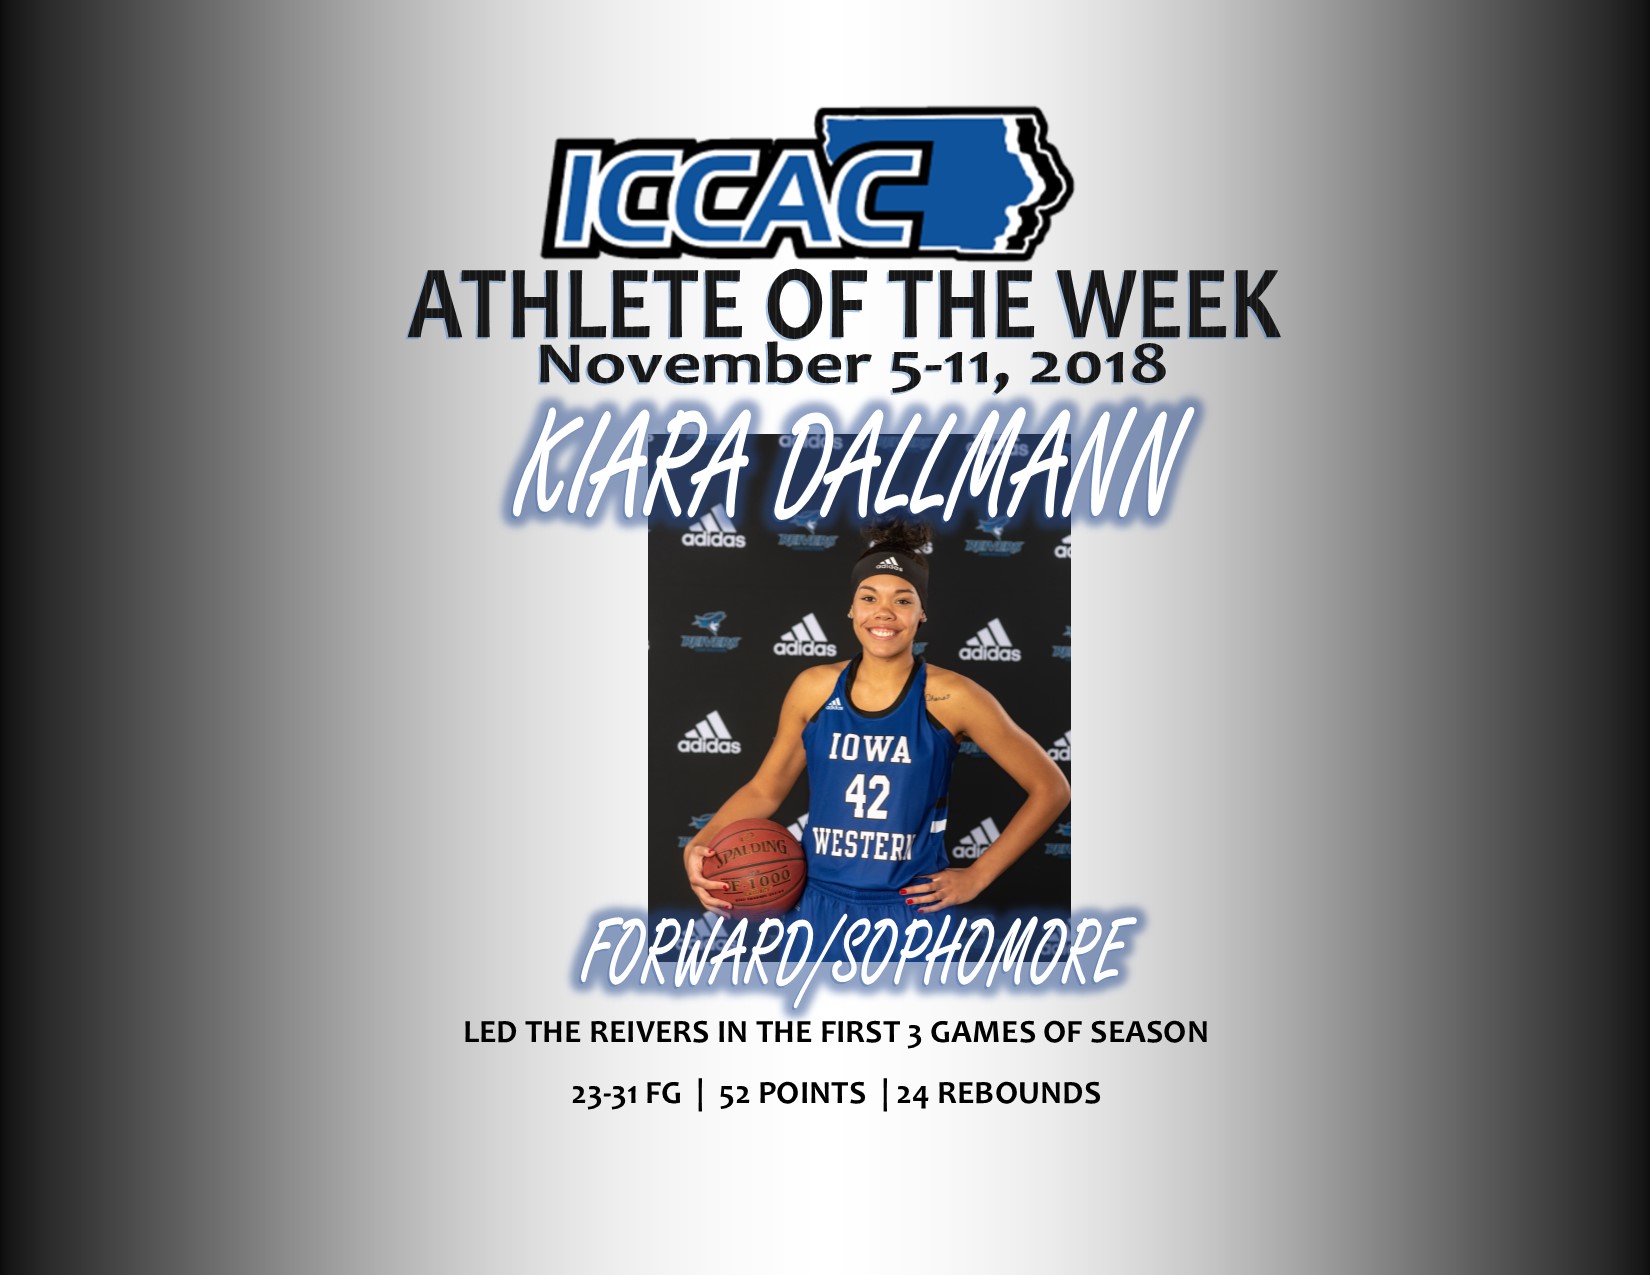 Dallmann earns Player of Week for ICCAC